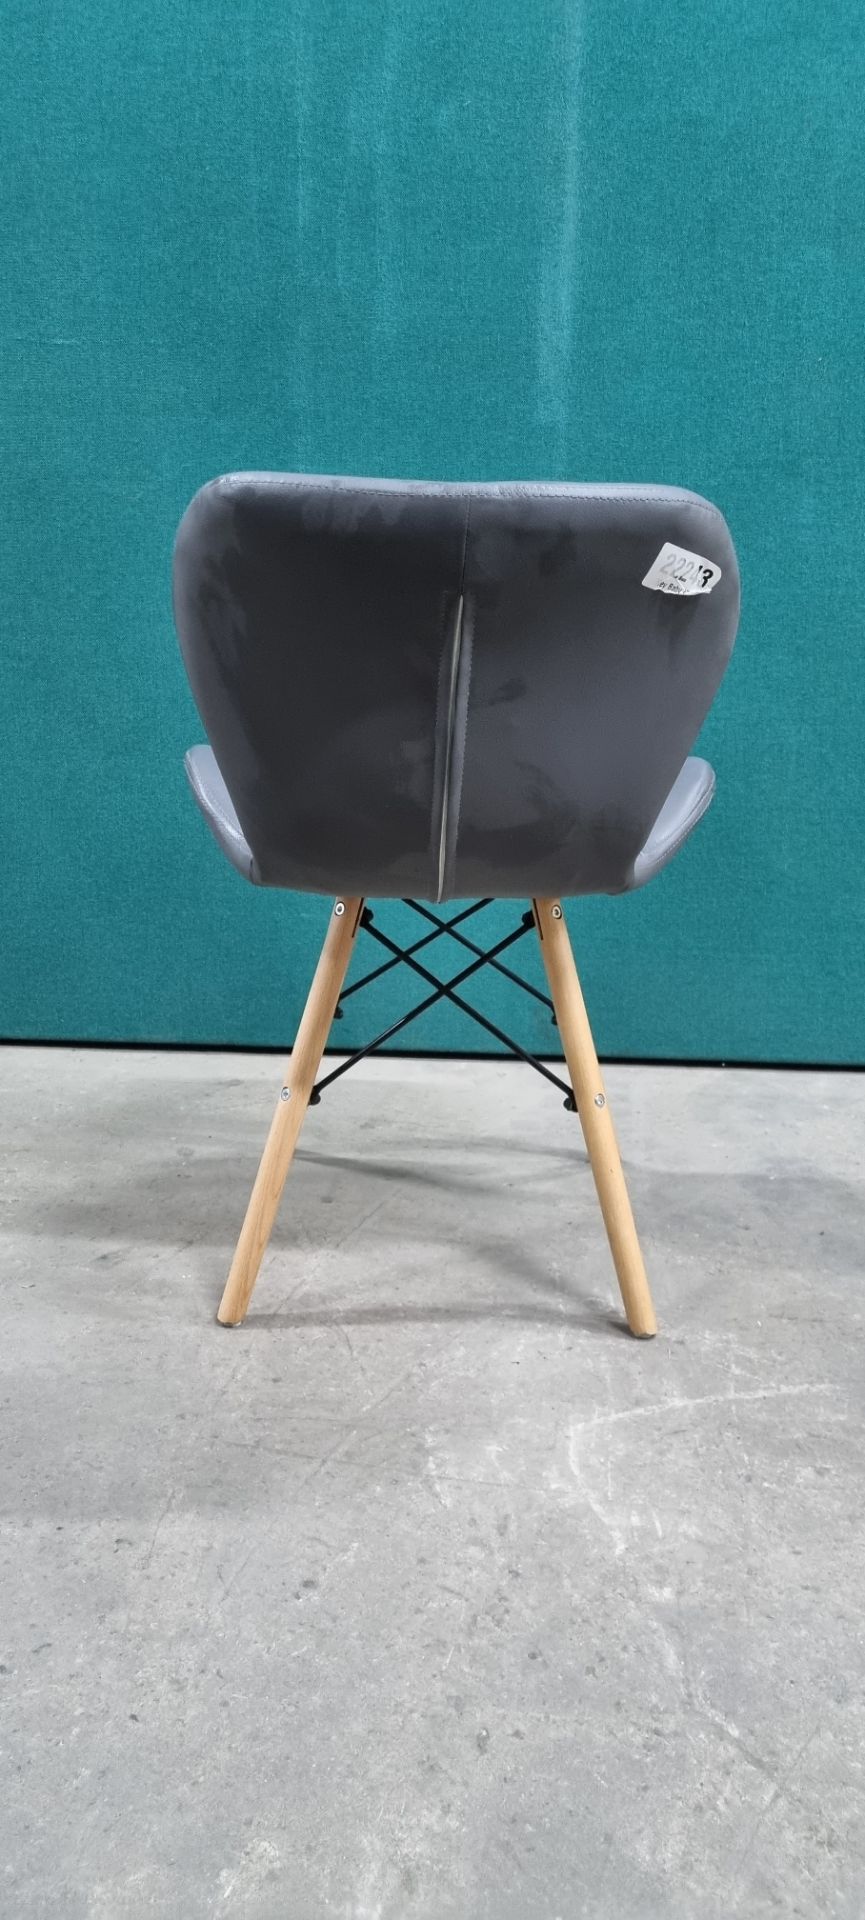 Grey Leather Effect Chair With Pine Legs 710mm High - Image 3 of 3